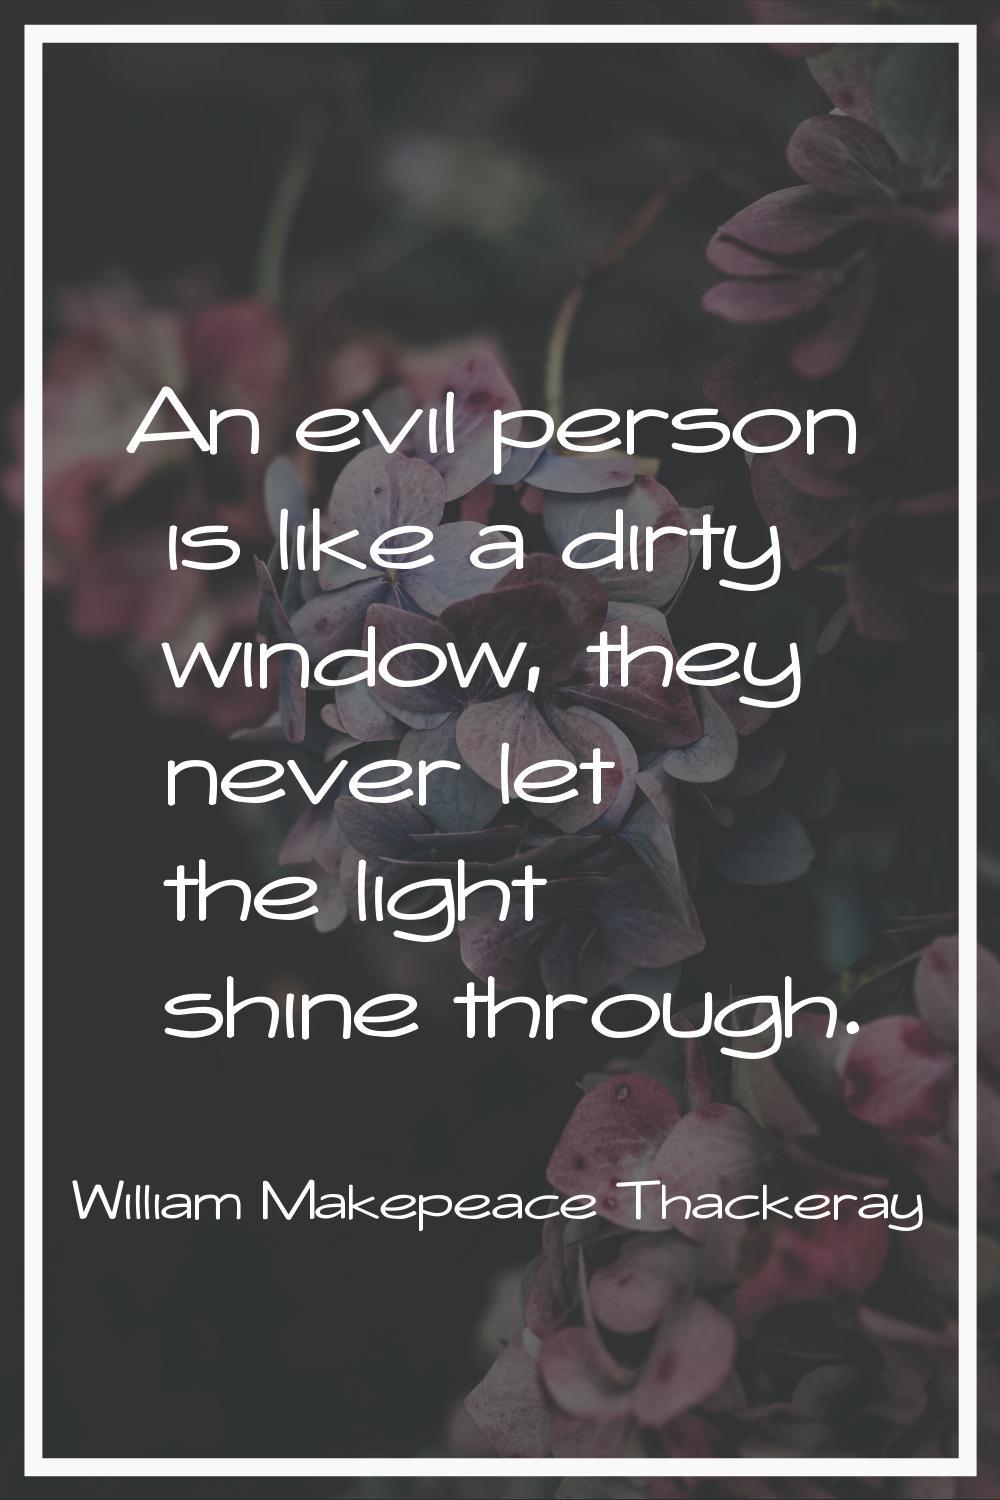 An evil person is like a dirty window, they never let the light shine through.